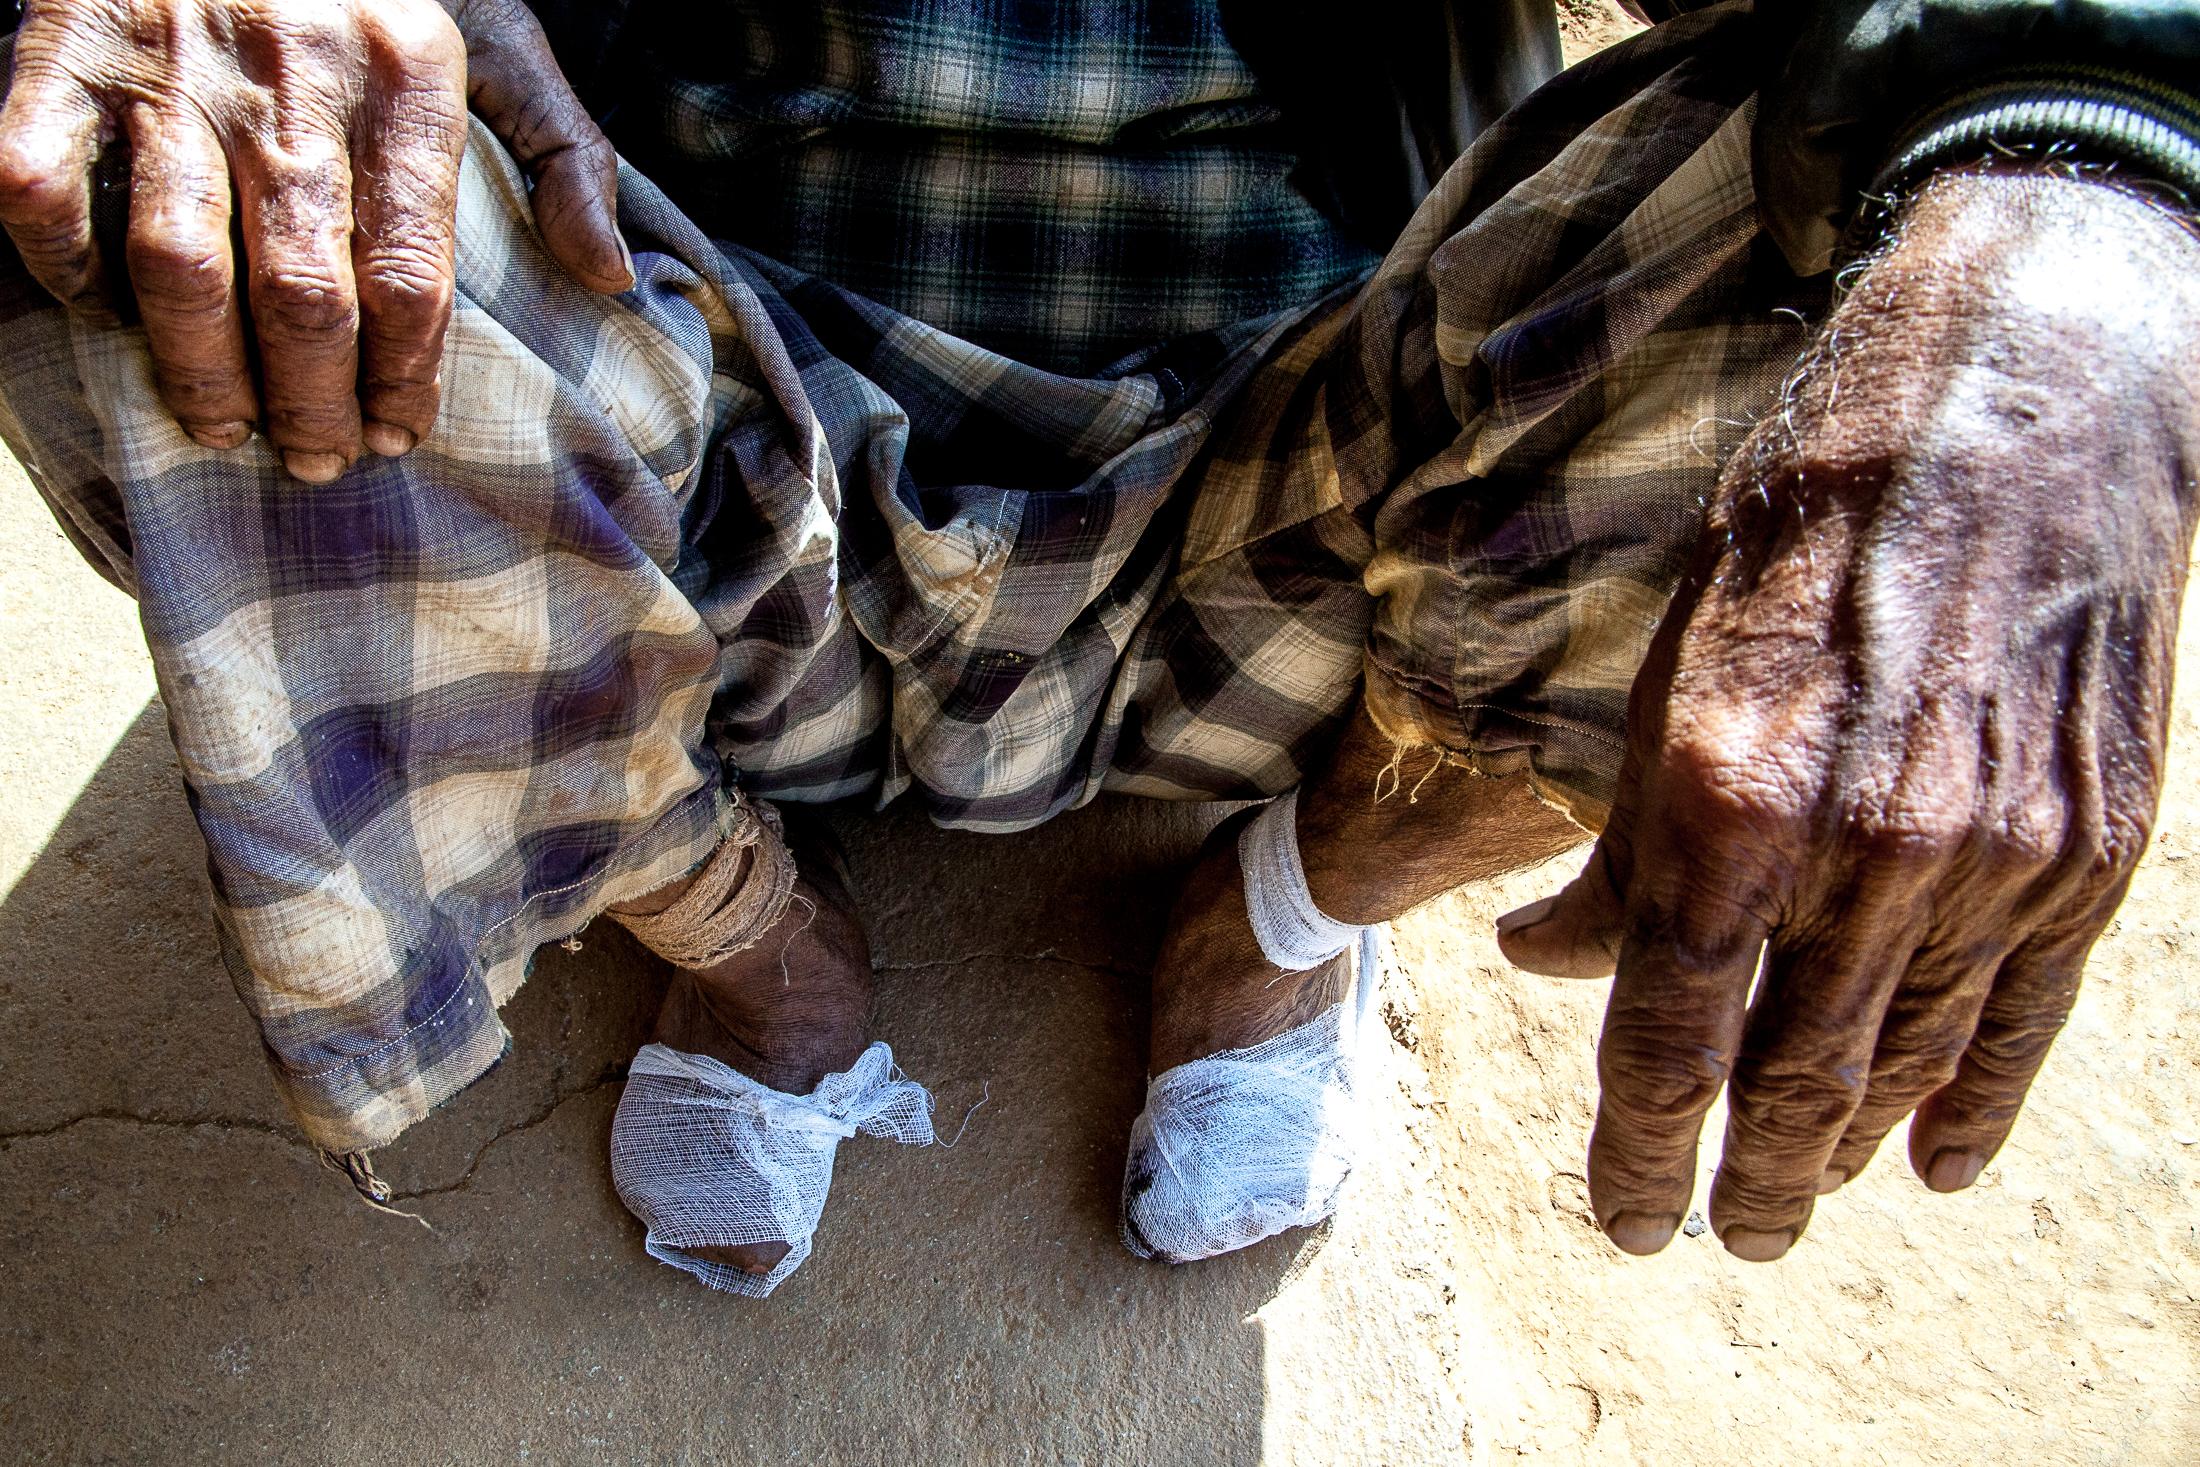 The Forgotten - LELE, NEPAL - JANUARY 24: A man affected by leprosy sits...